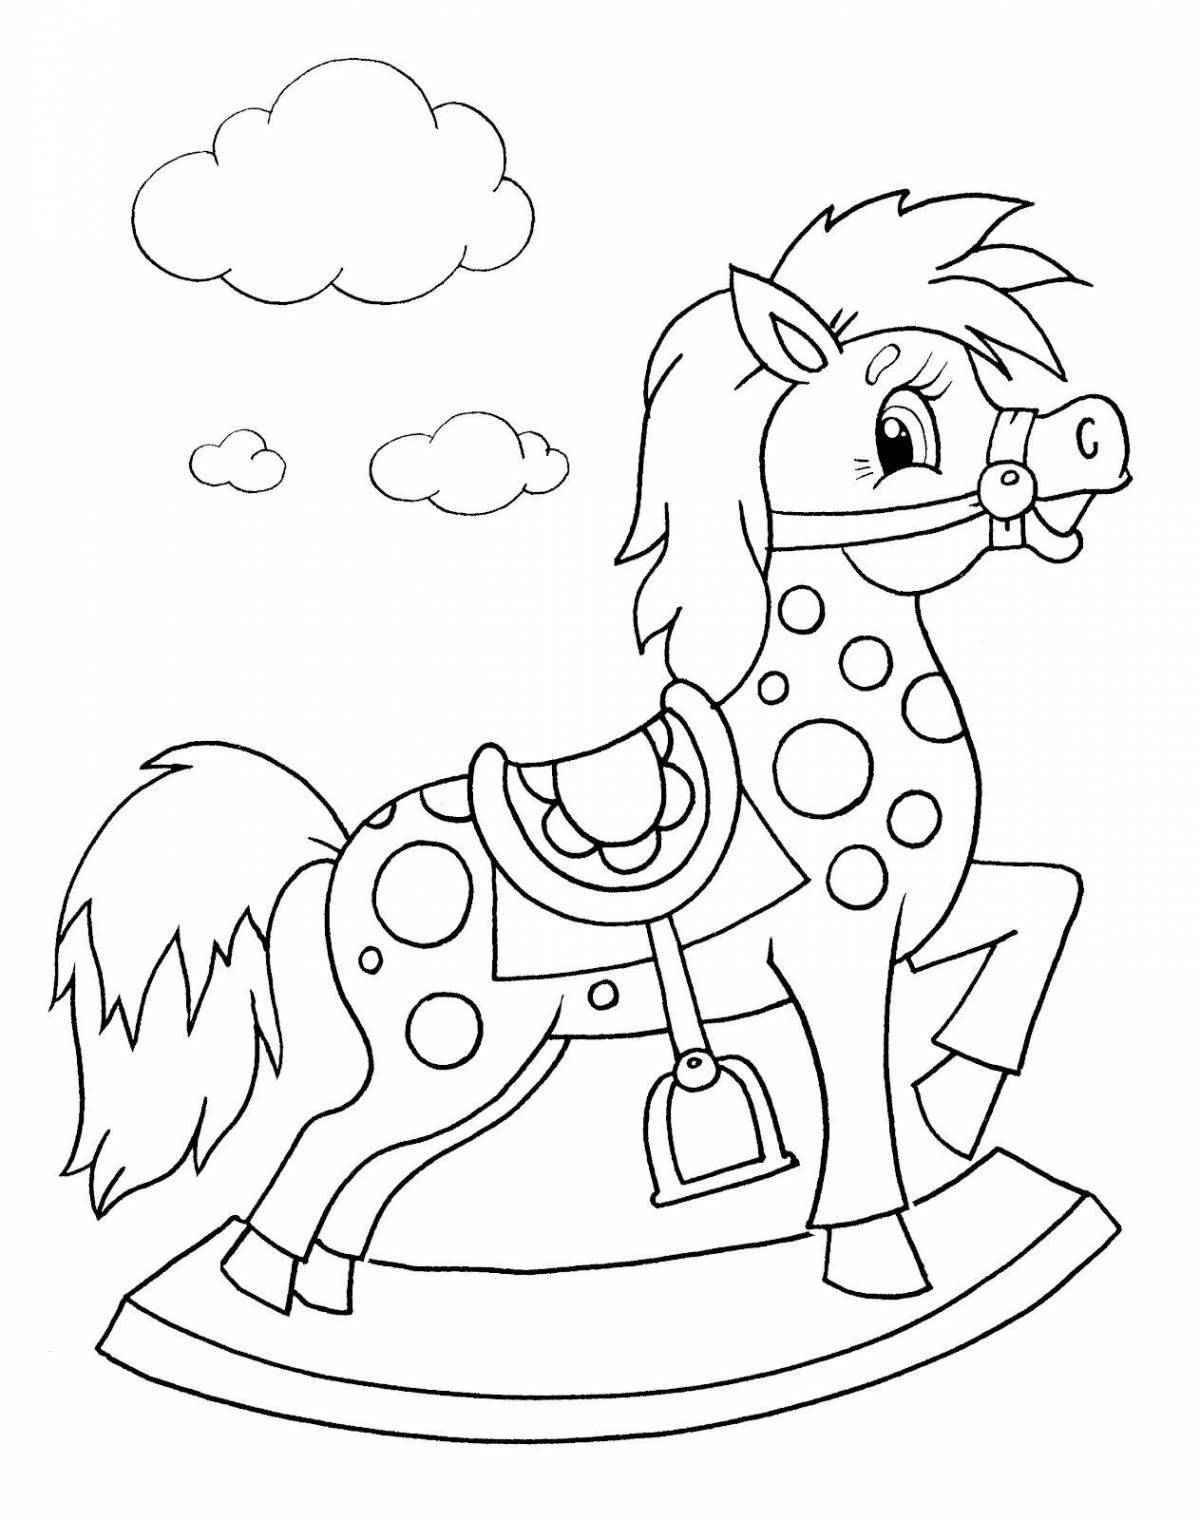 Coloring pages for kids for kids #10